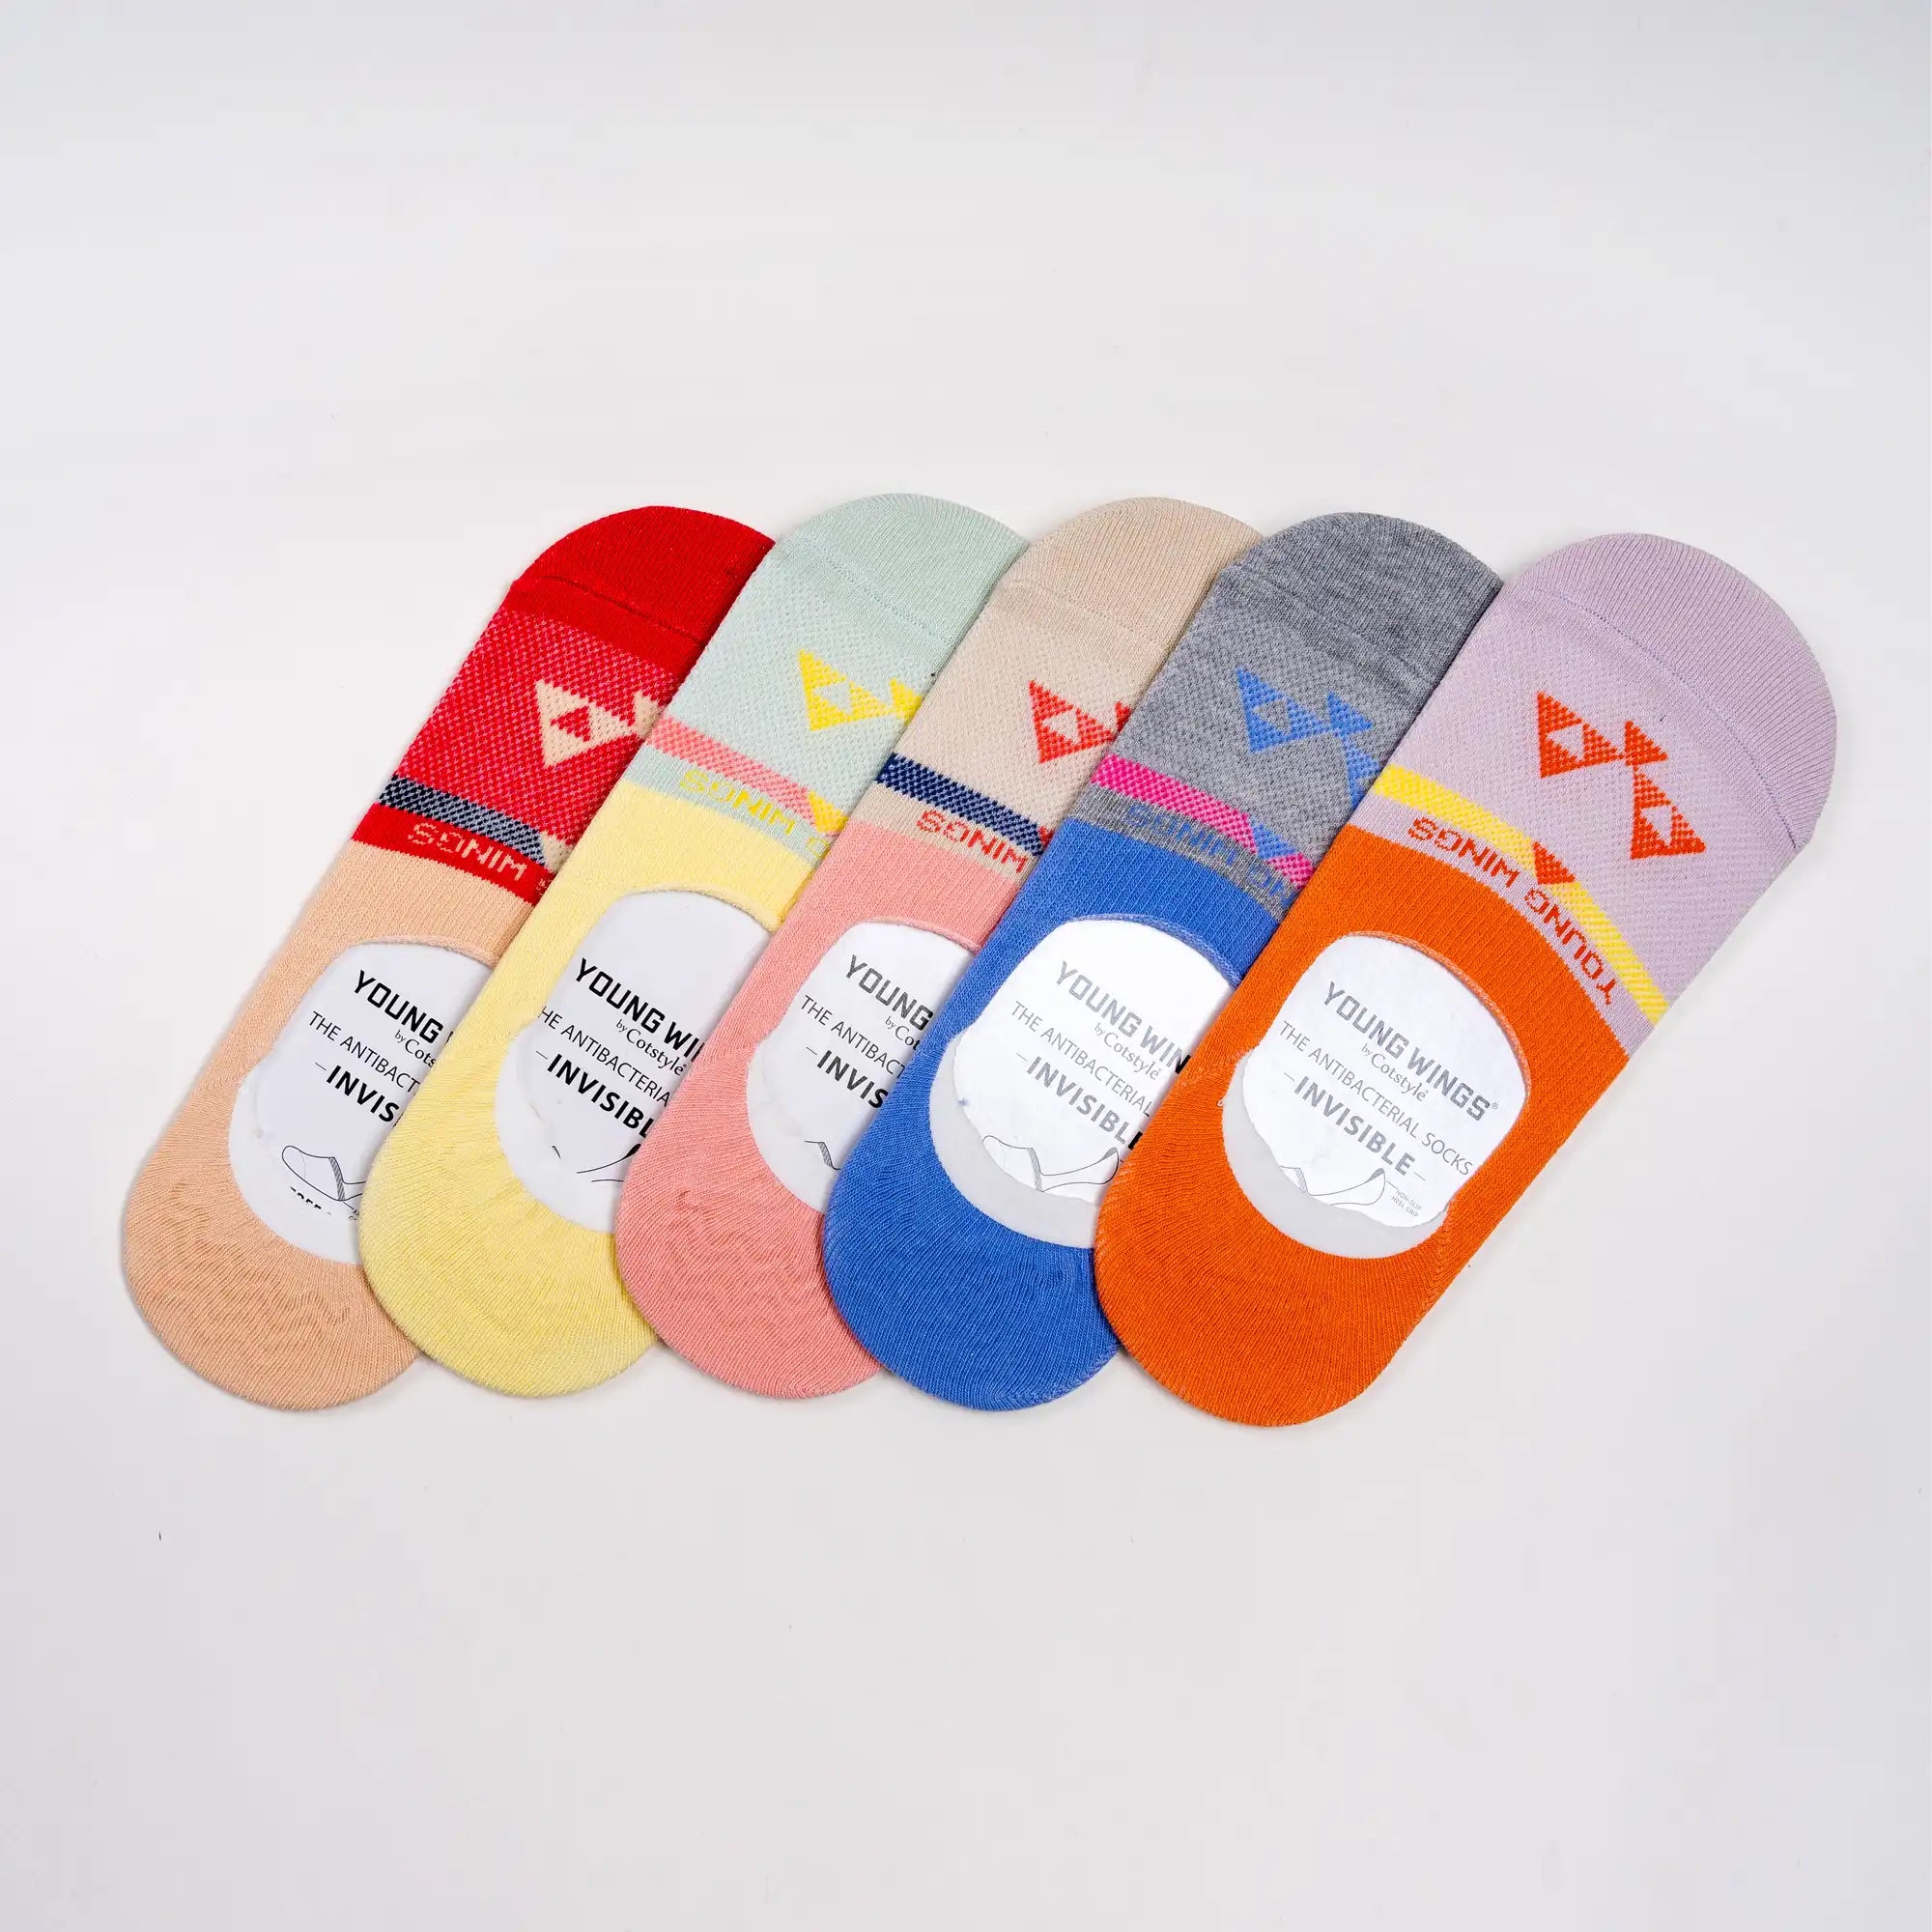 Young Wings Women's Multi Colour Cotton Fabric Design No-Show Socks - Pack of 5, Style no. 9003-W1